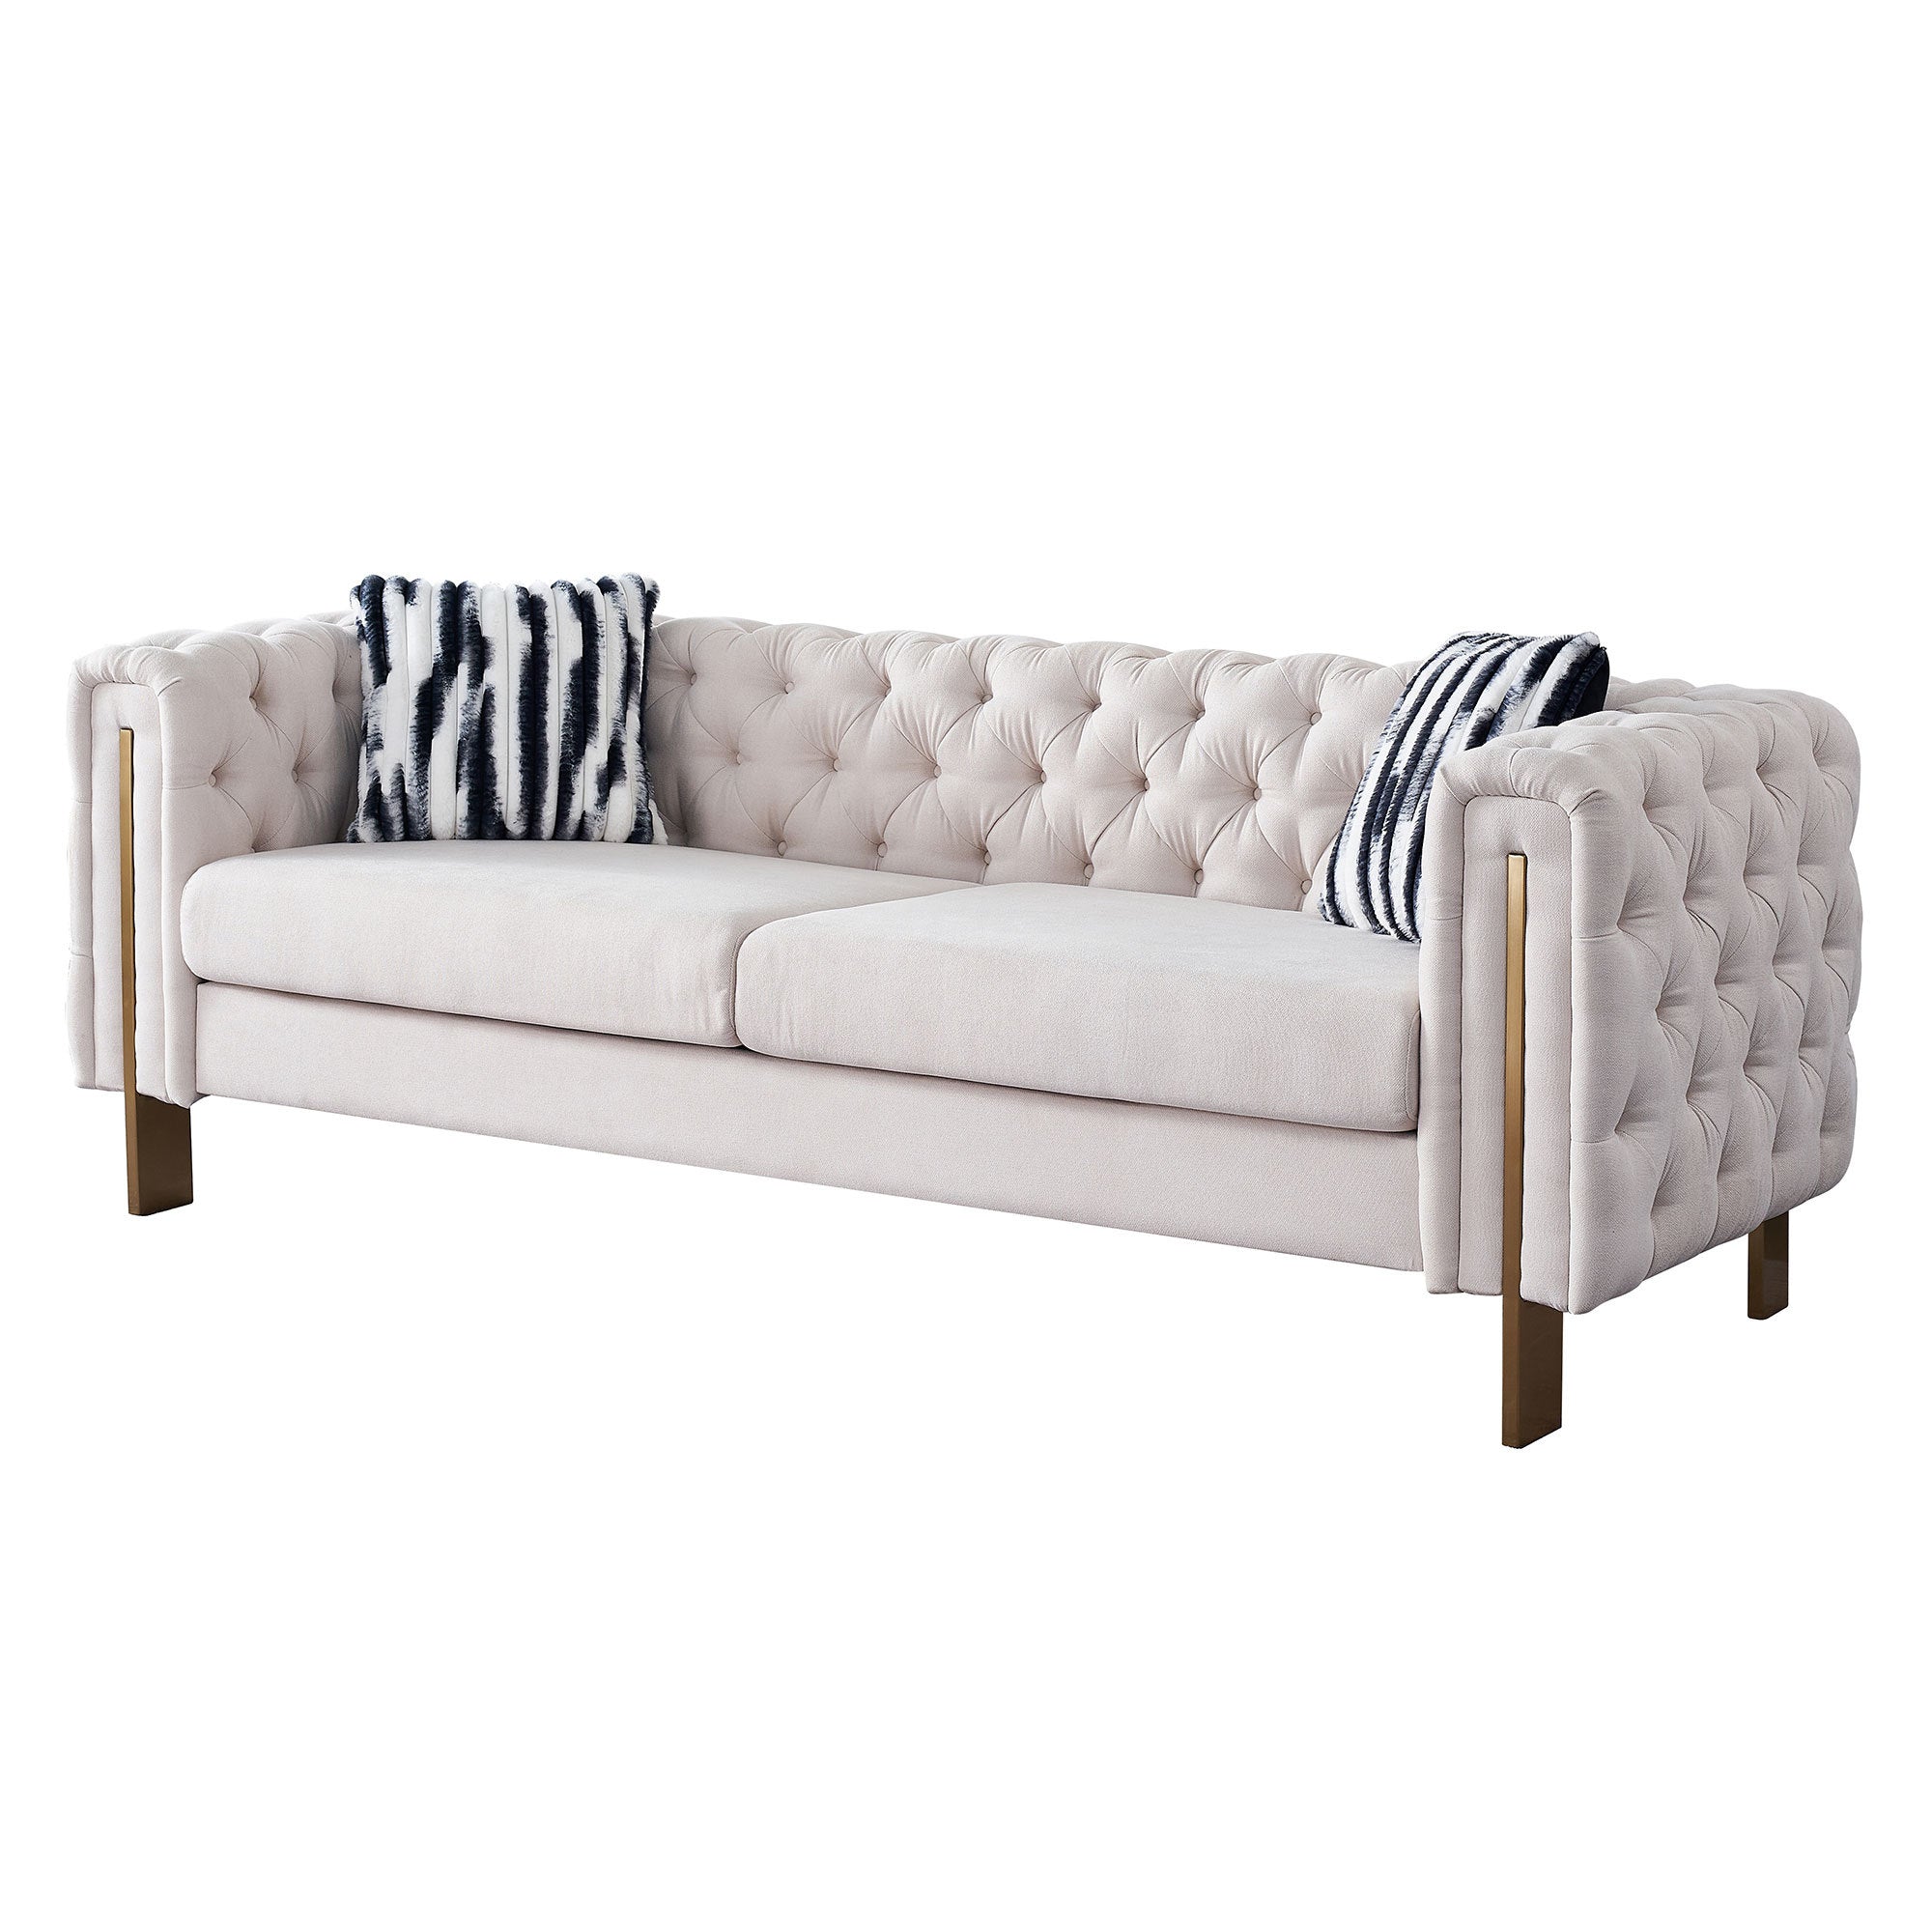 Modern Living Room Sofa Linen Square Arm Sofa, 84.25" beige-linen-wood-primary living space-tufted